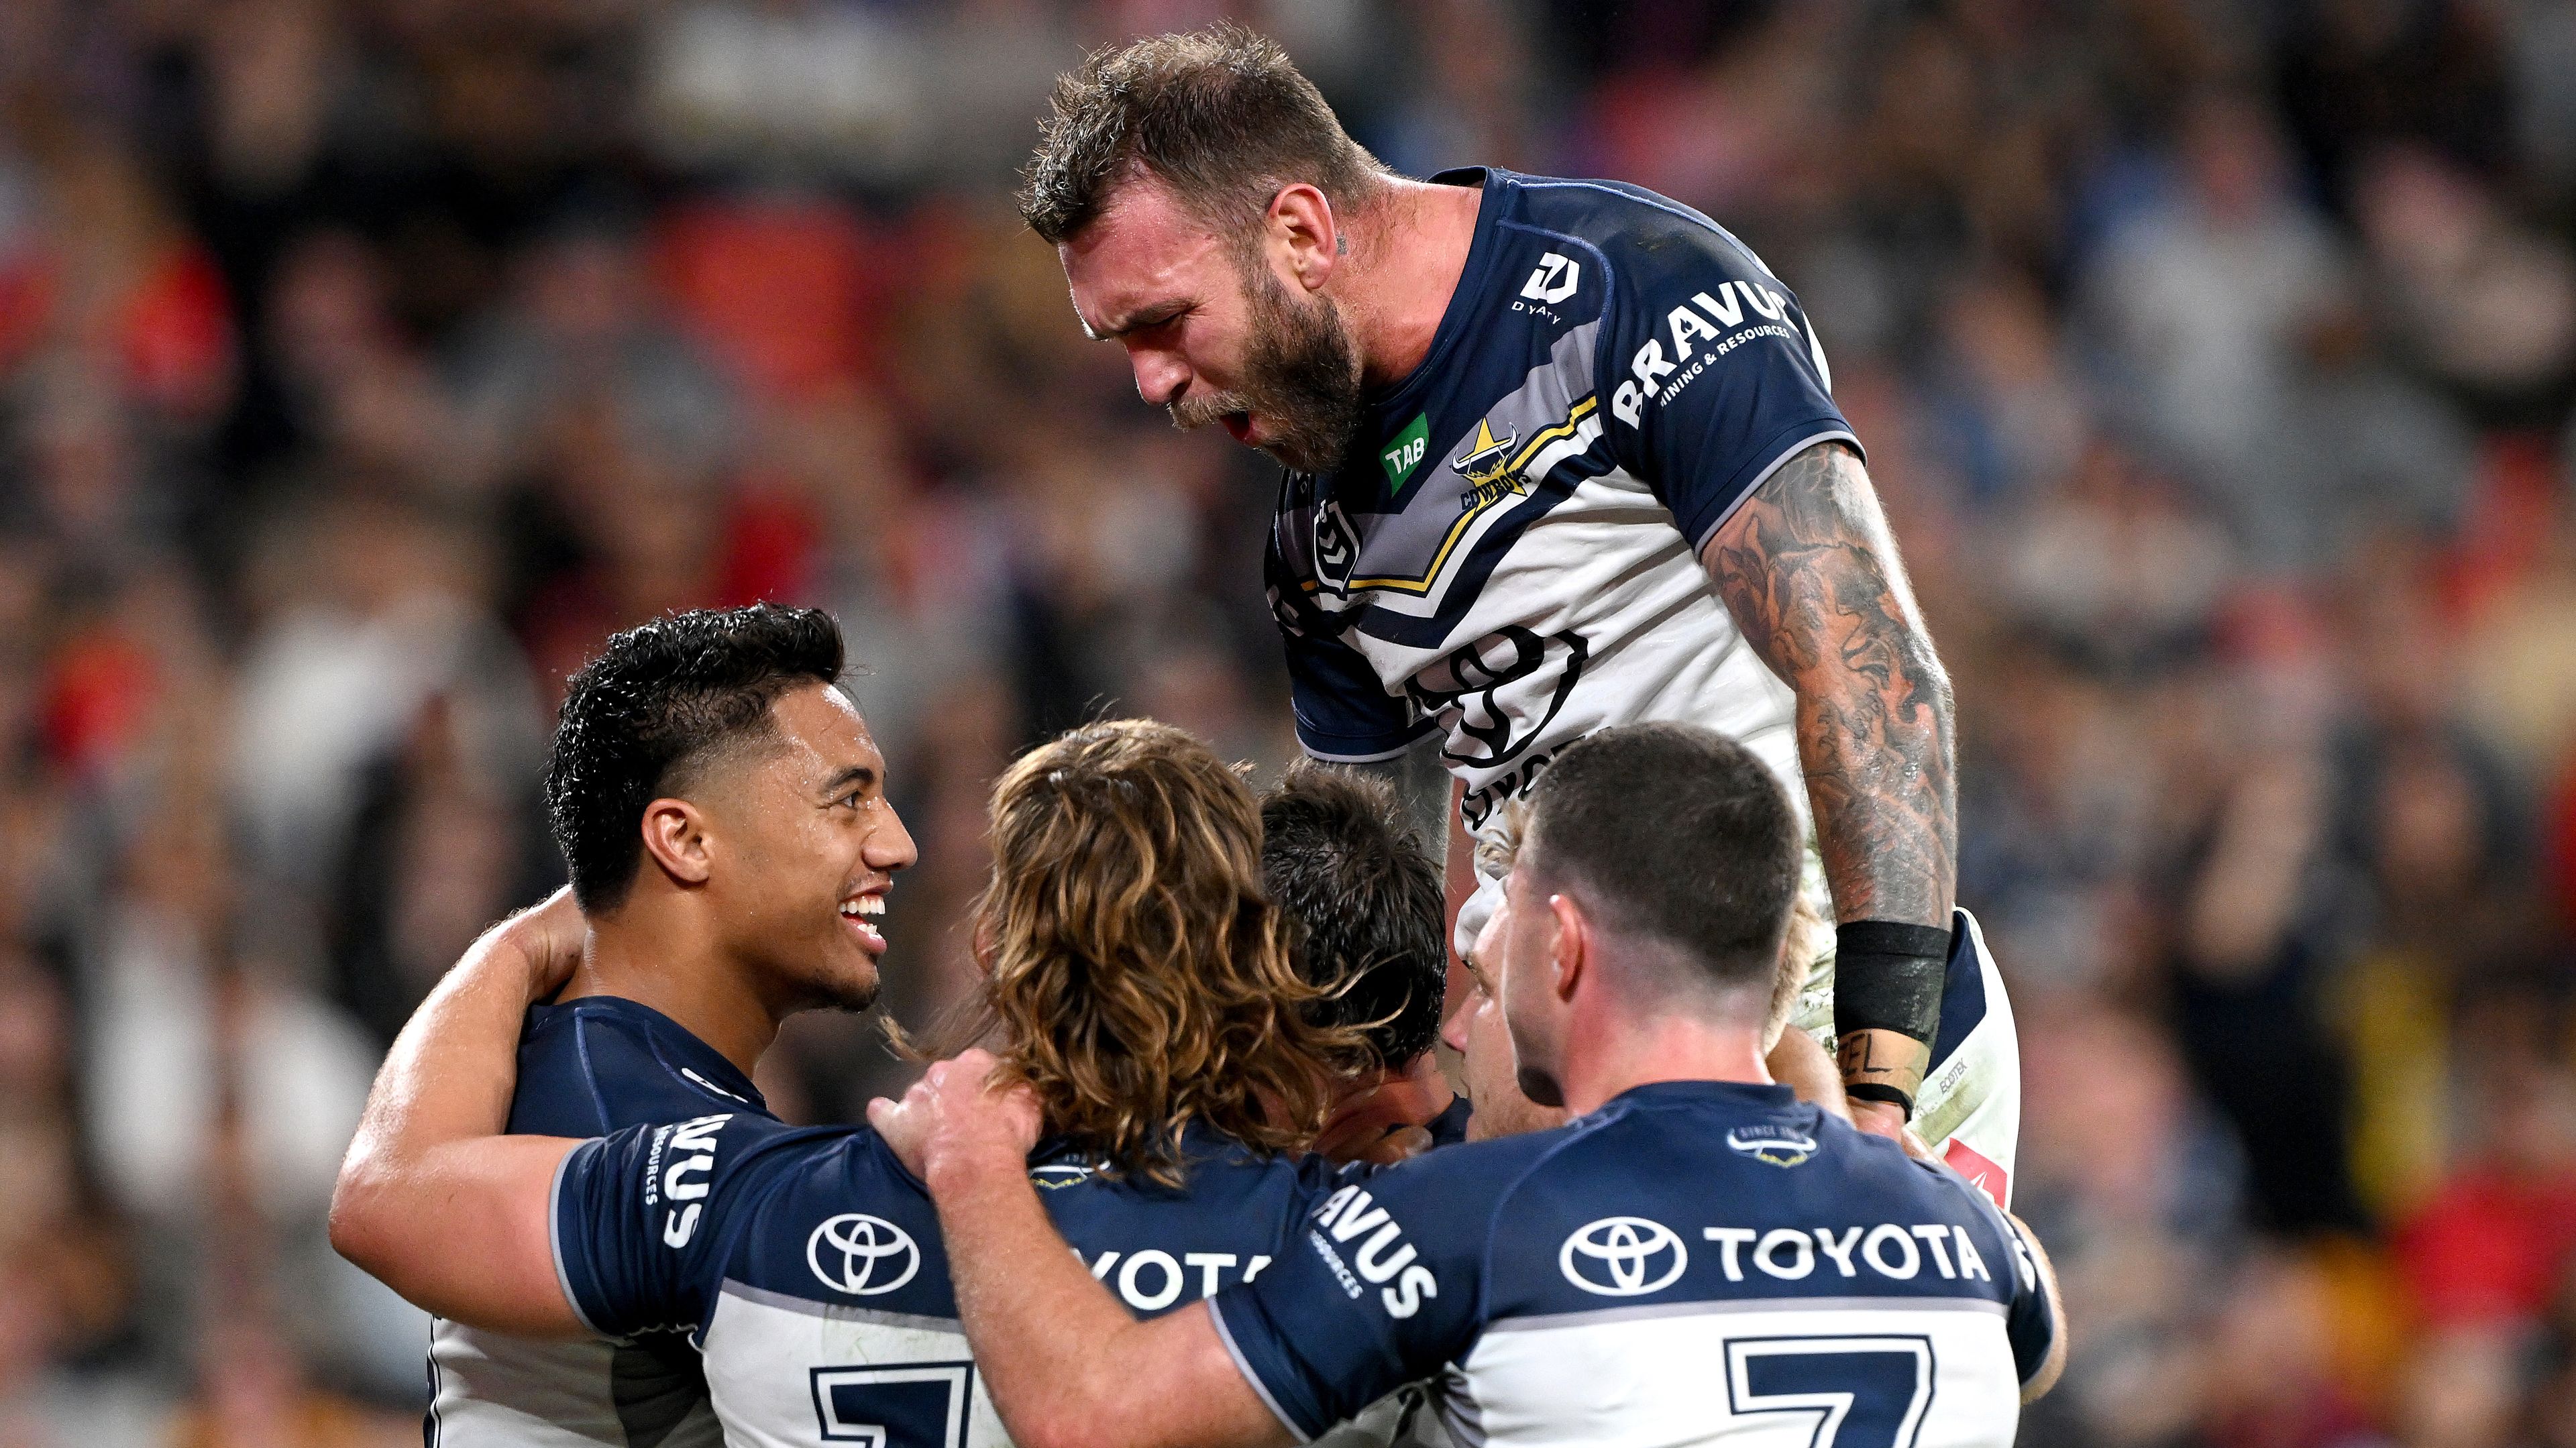 Scott Drinkwater of the Cowboys is congratulated by team mates after scoring a try during the round 26 NRL match between Dolphins and North Queensland Cowboys at Suncorp Stadium on August 25, 2023 in Brisbane, Australia. (Photo by Bradley Kanaris/Getty Images)